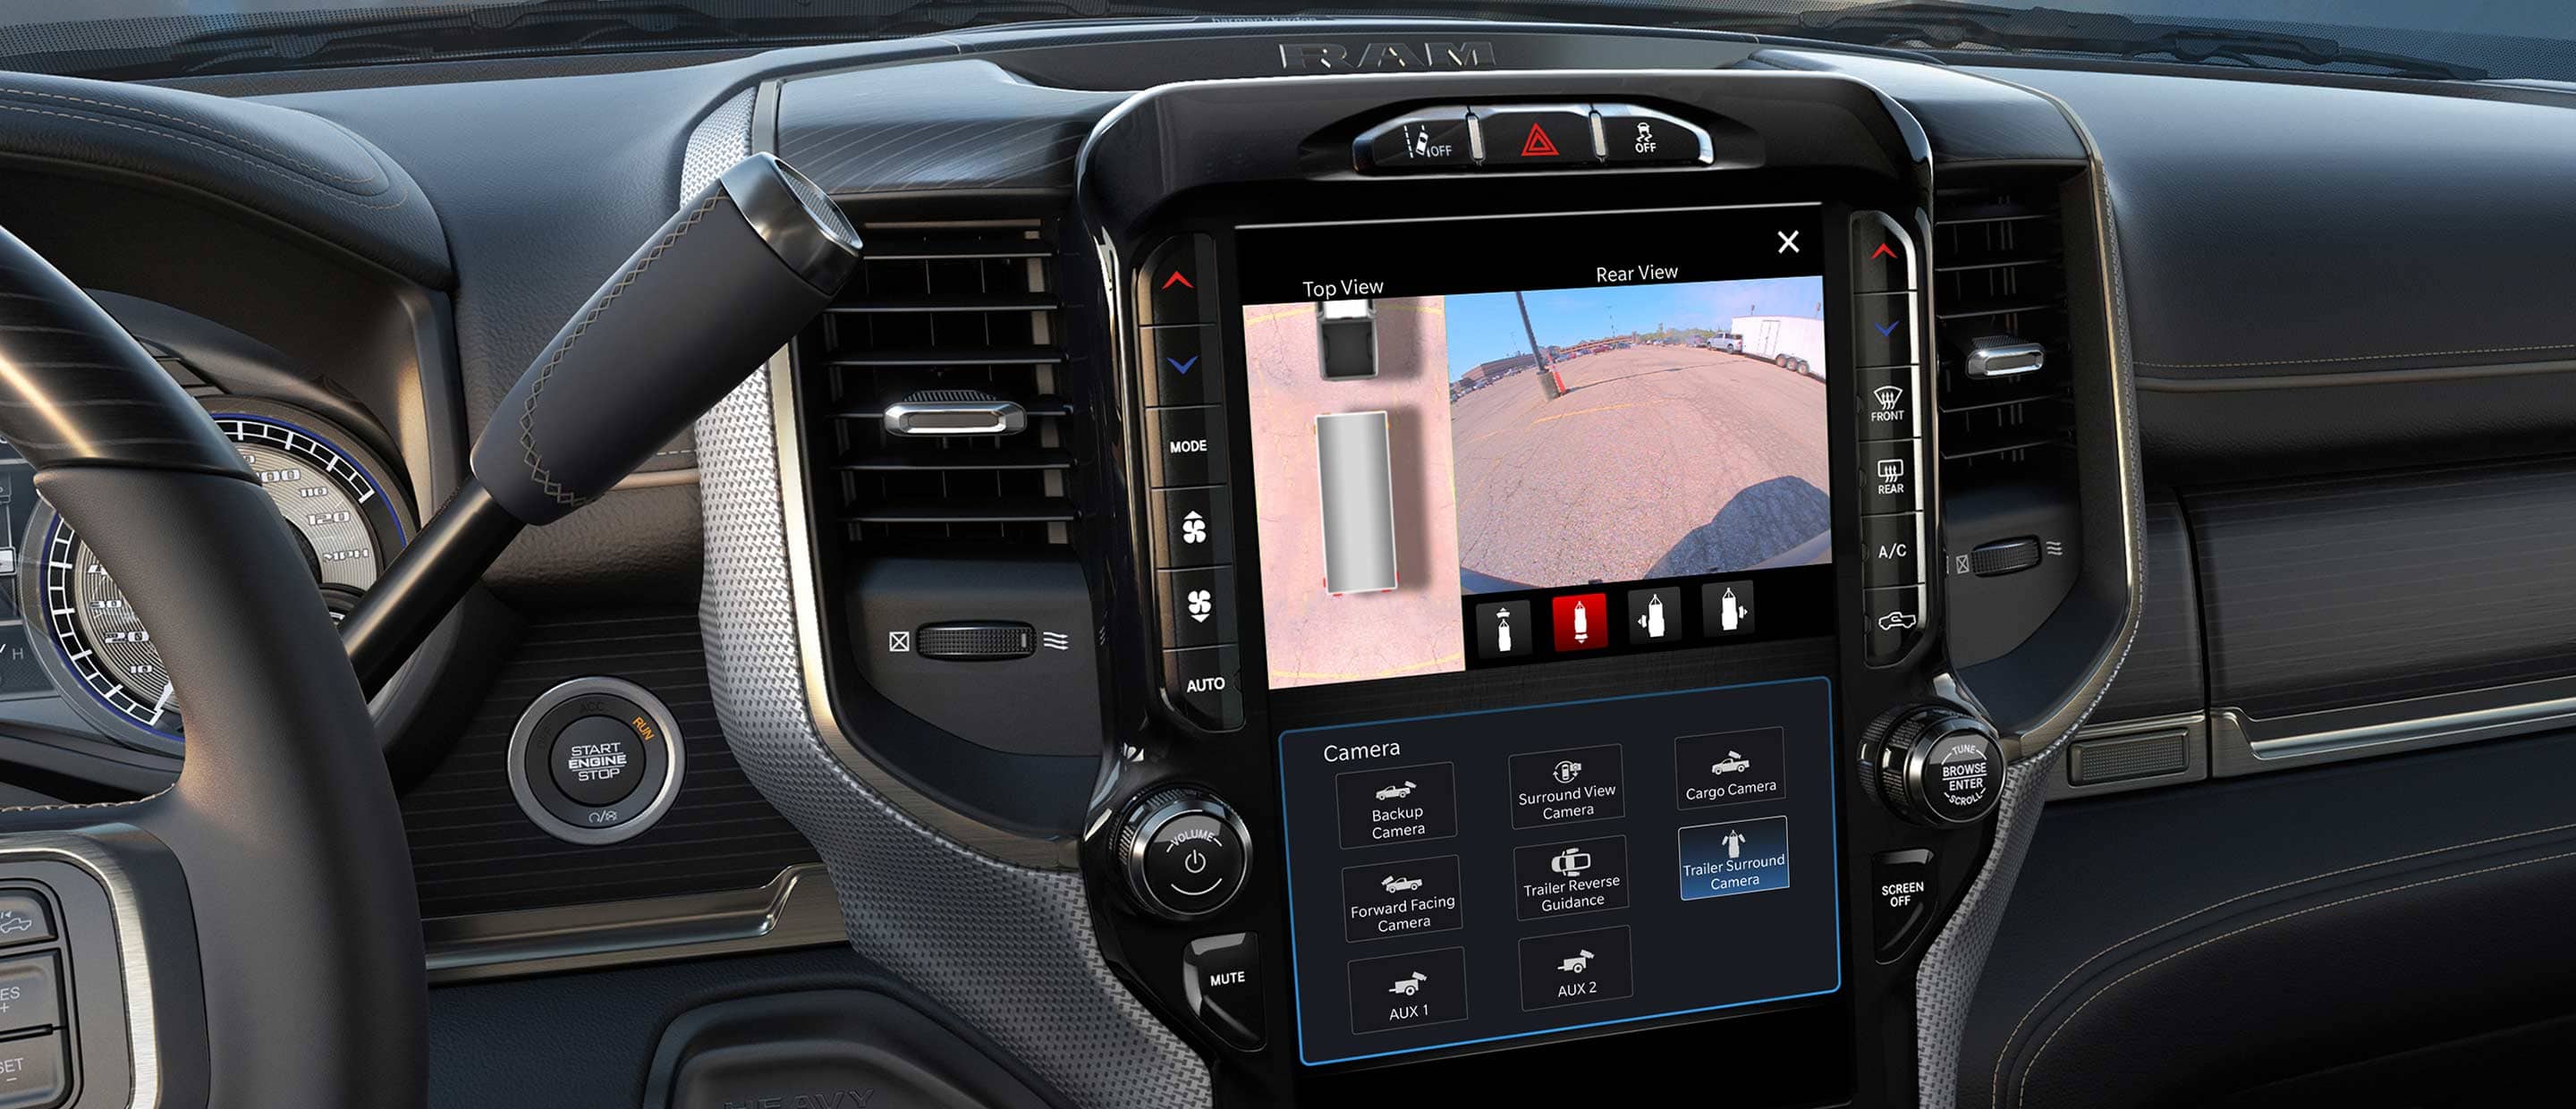 The touchscreen in the 2022 Ram 3500 showing the trailer top view and trailer hitch view.